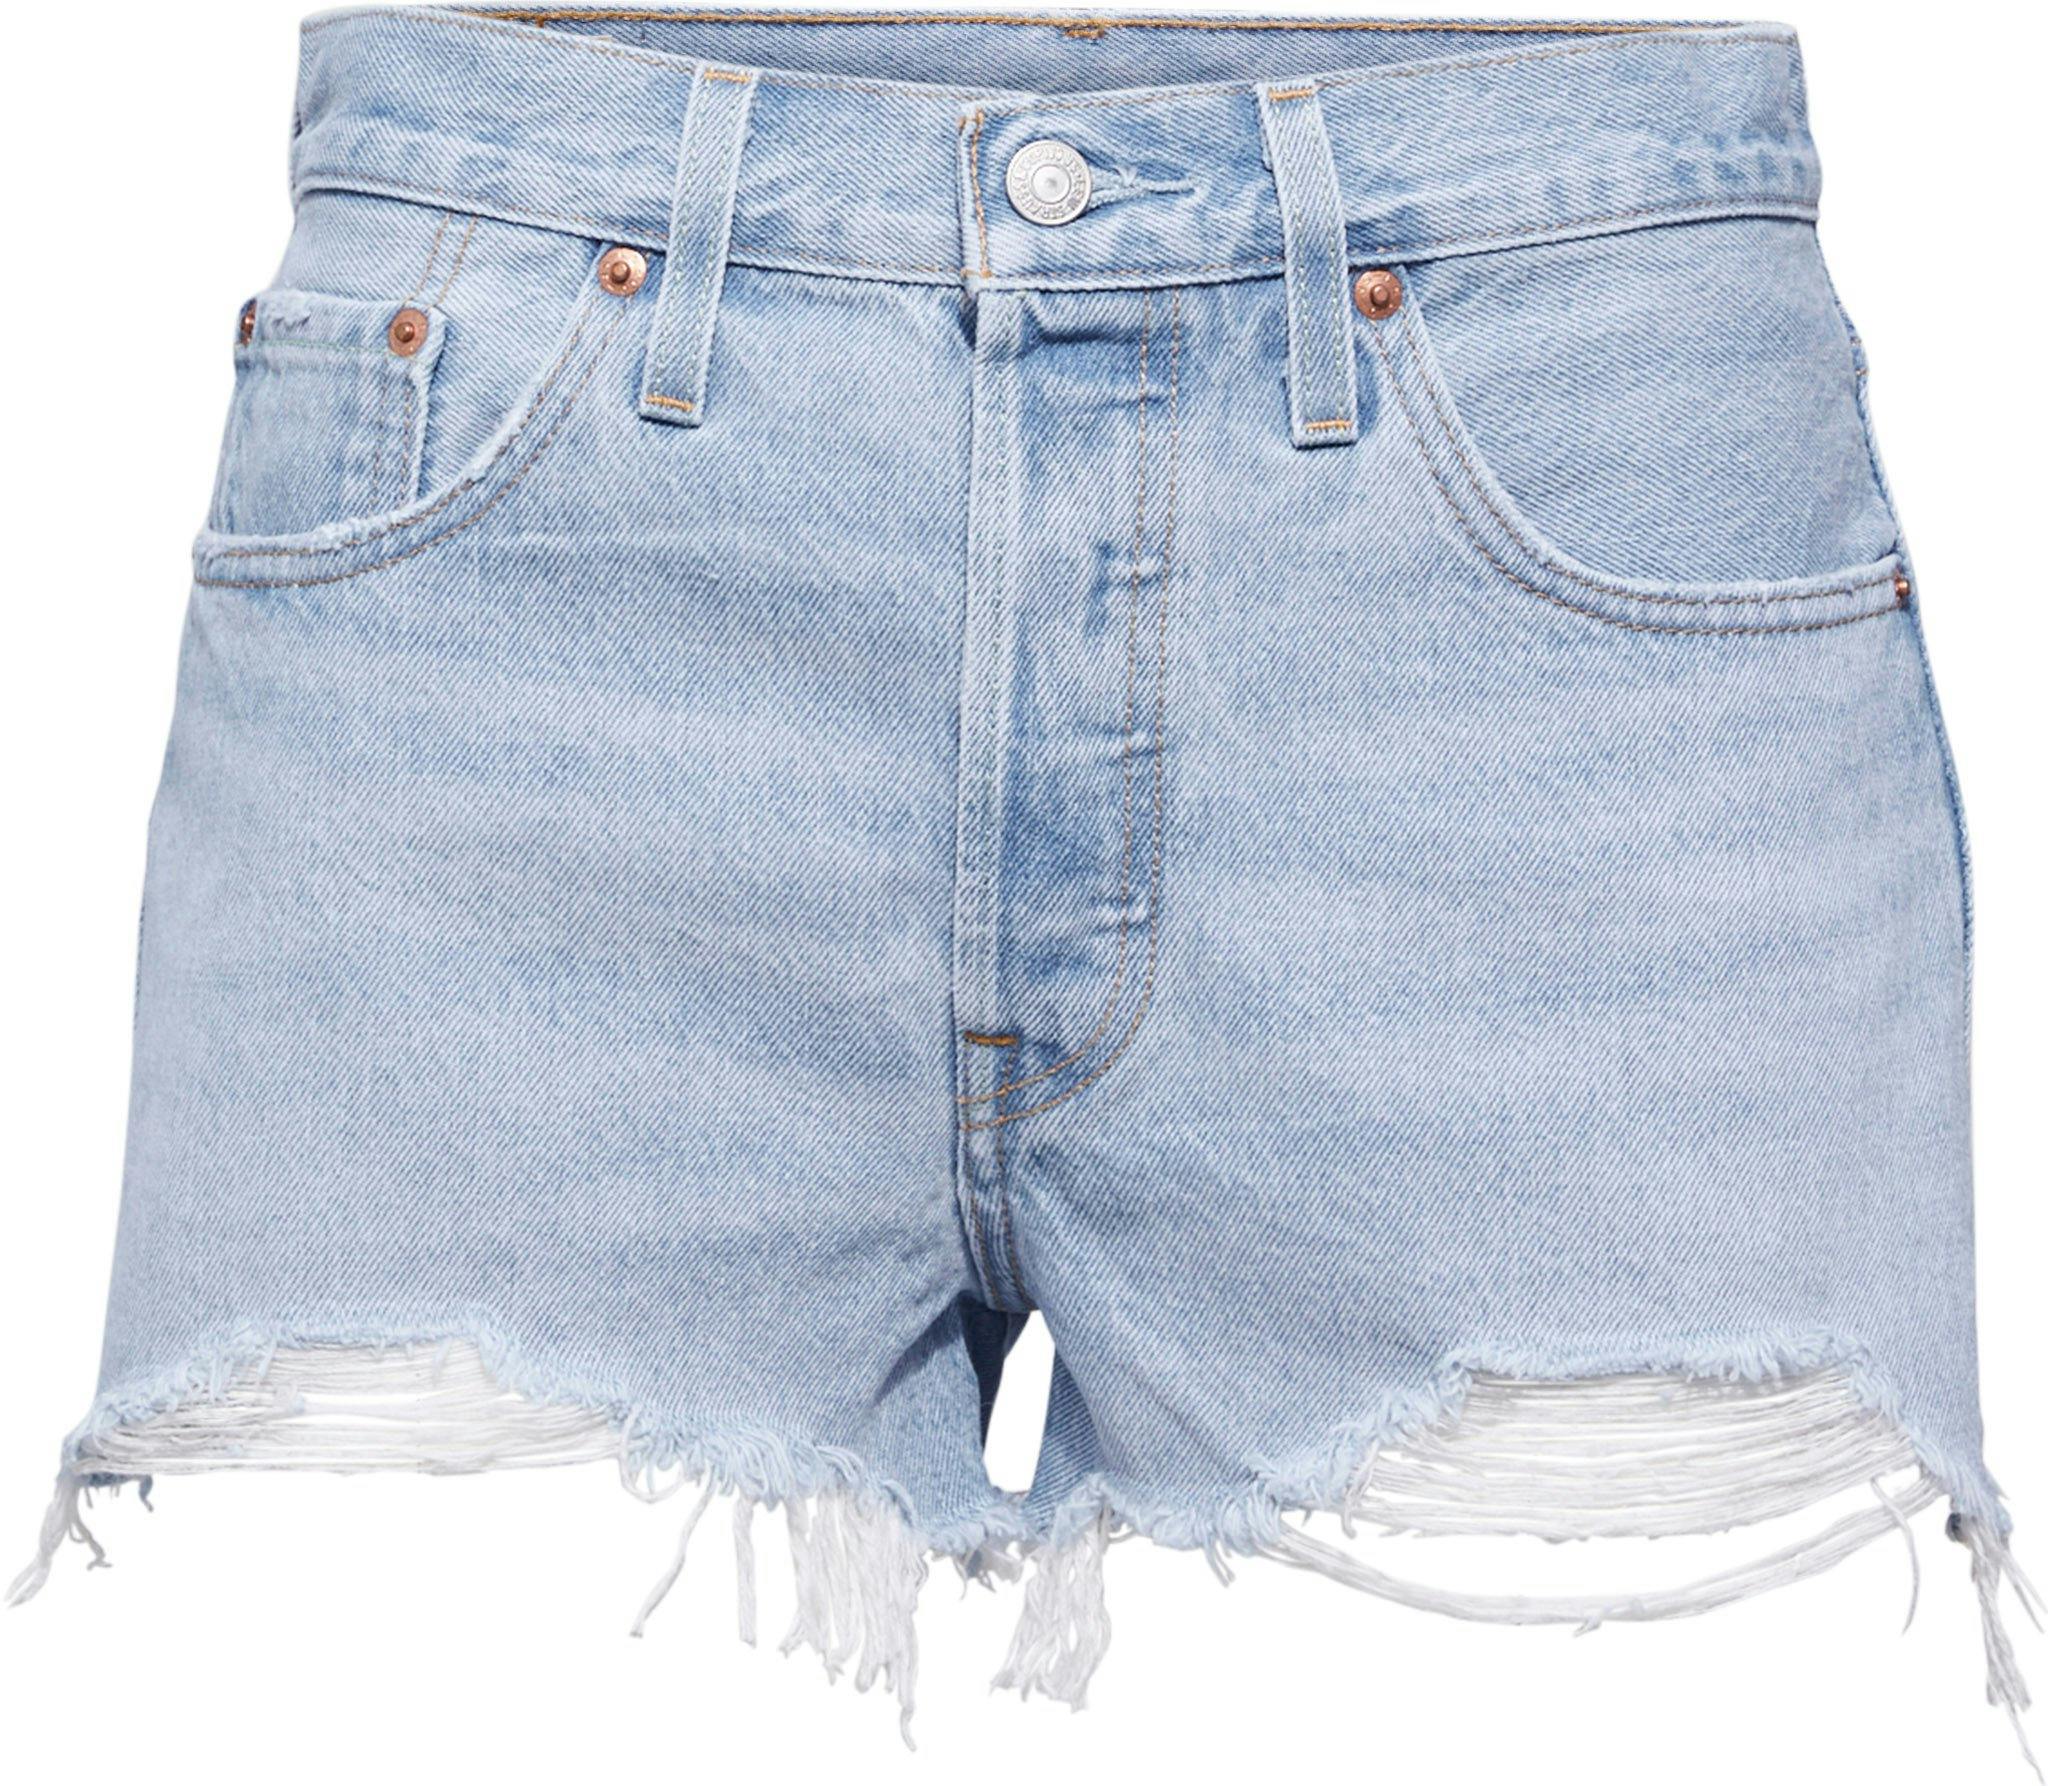 Product image for 501 High Rise Shorts - Women's